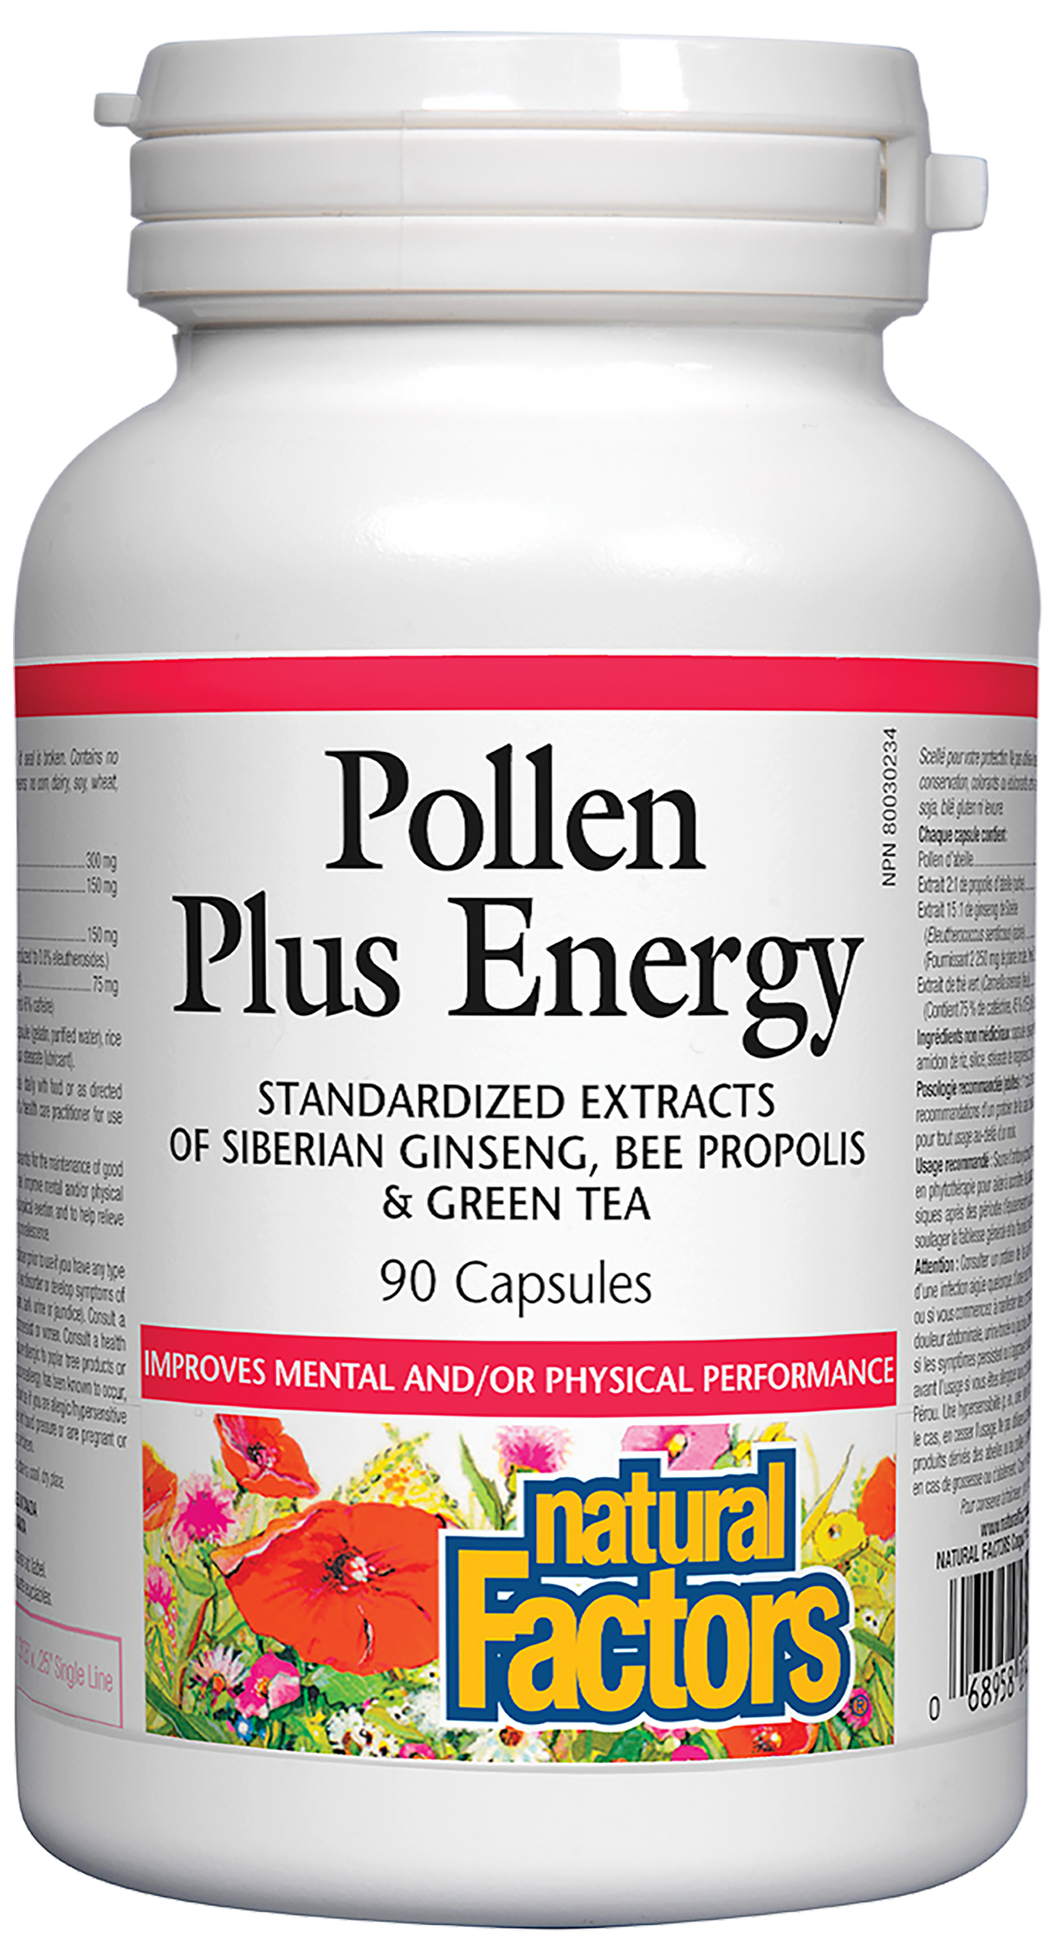 Natural Factors Pollen Plus Energy is a natural source of antioxidants, amino acids, vitamins, minerals, coenzymes, and fatty acids that improves mental and physical performance. It combines bee pollen with standardized extracts of bee propolis, Siberian ginseng, and green tea to enhance immunity and increase strength during times of recovery.